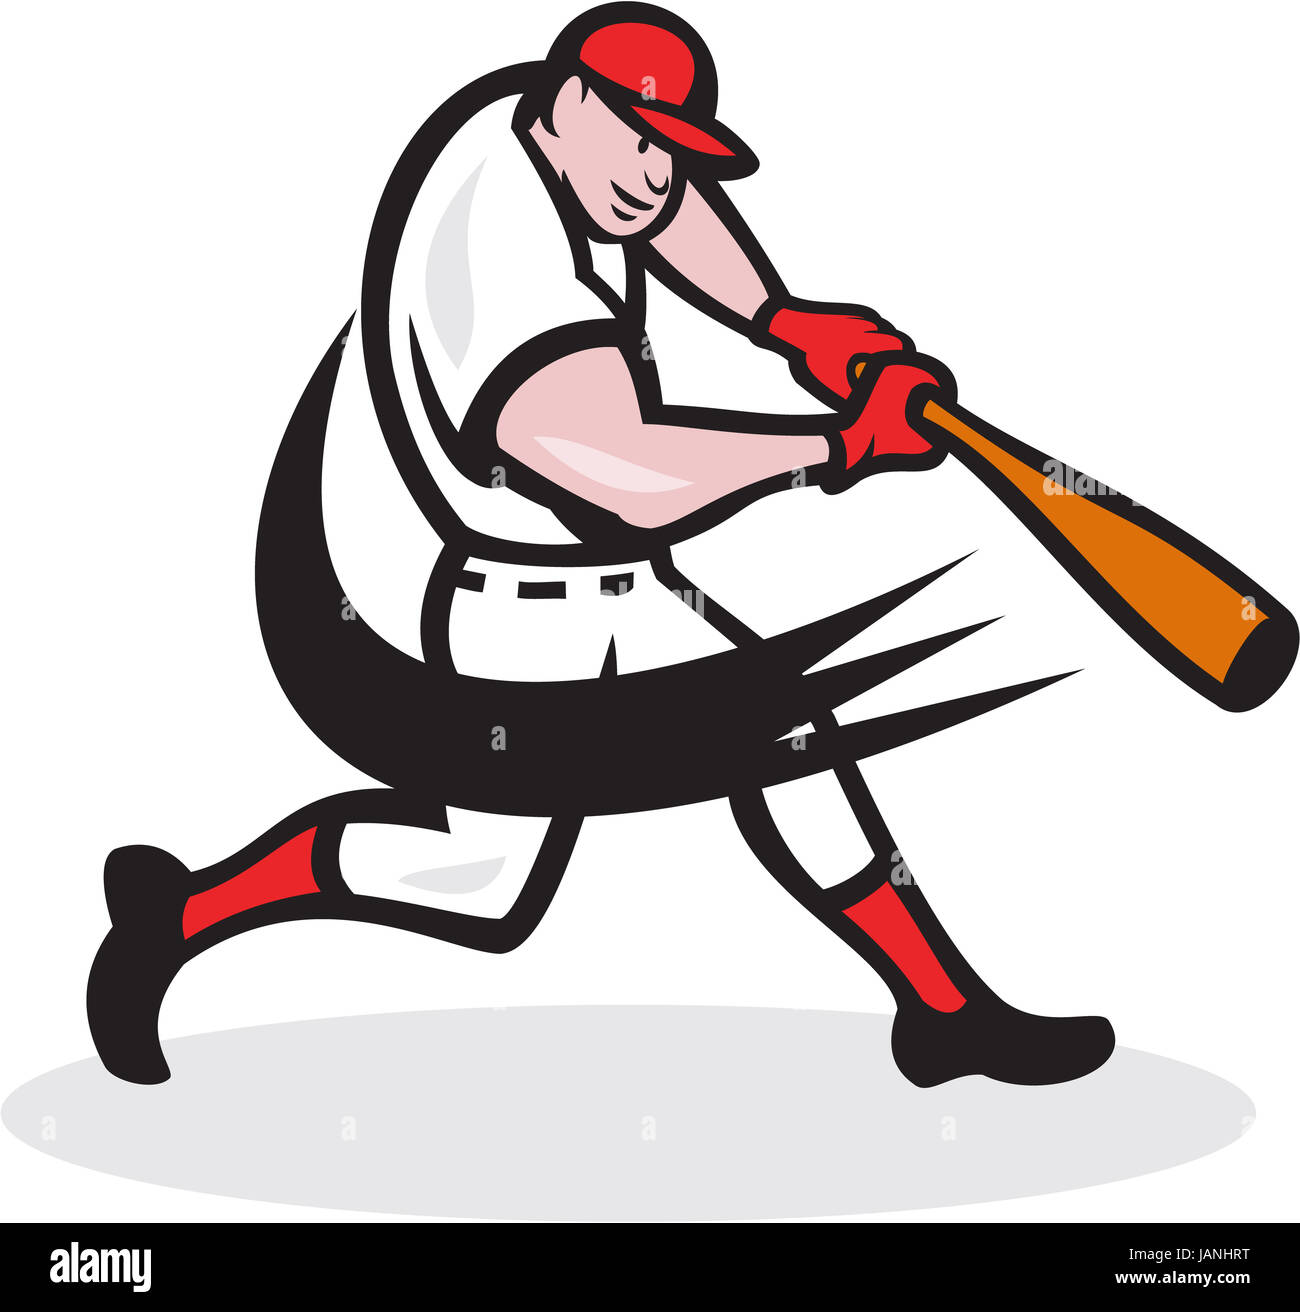 Illustration of a american baseball player batter hitter batting with bat done in cartoon style isolated on white background. Stock Photo